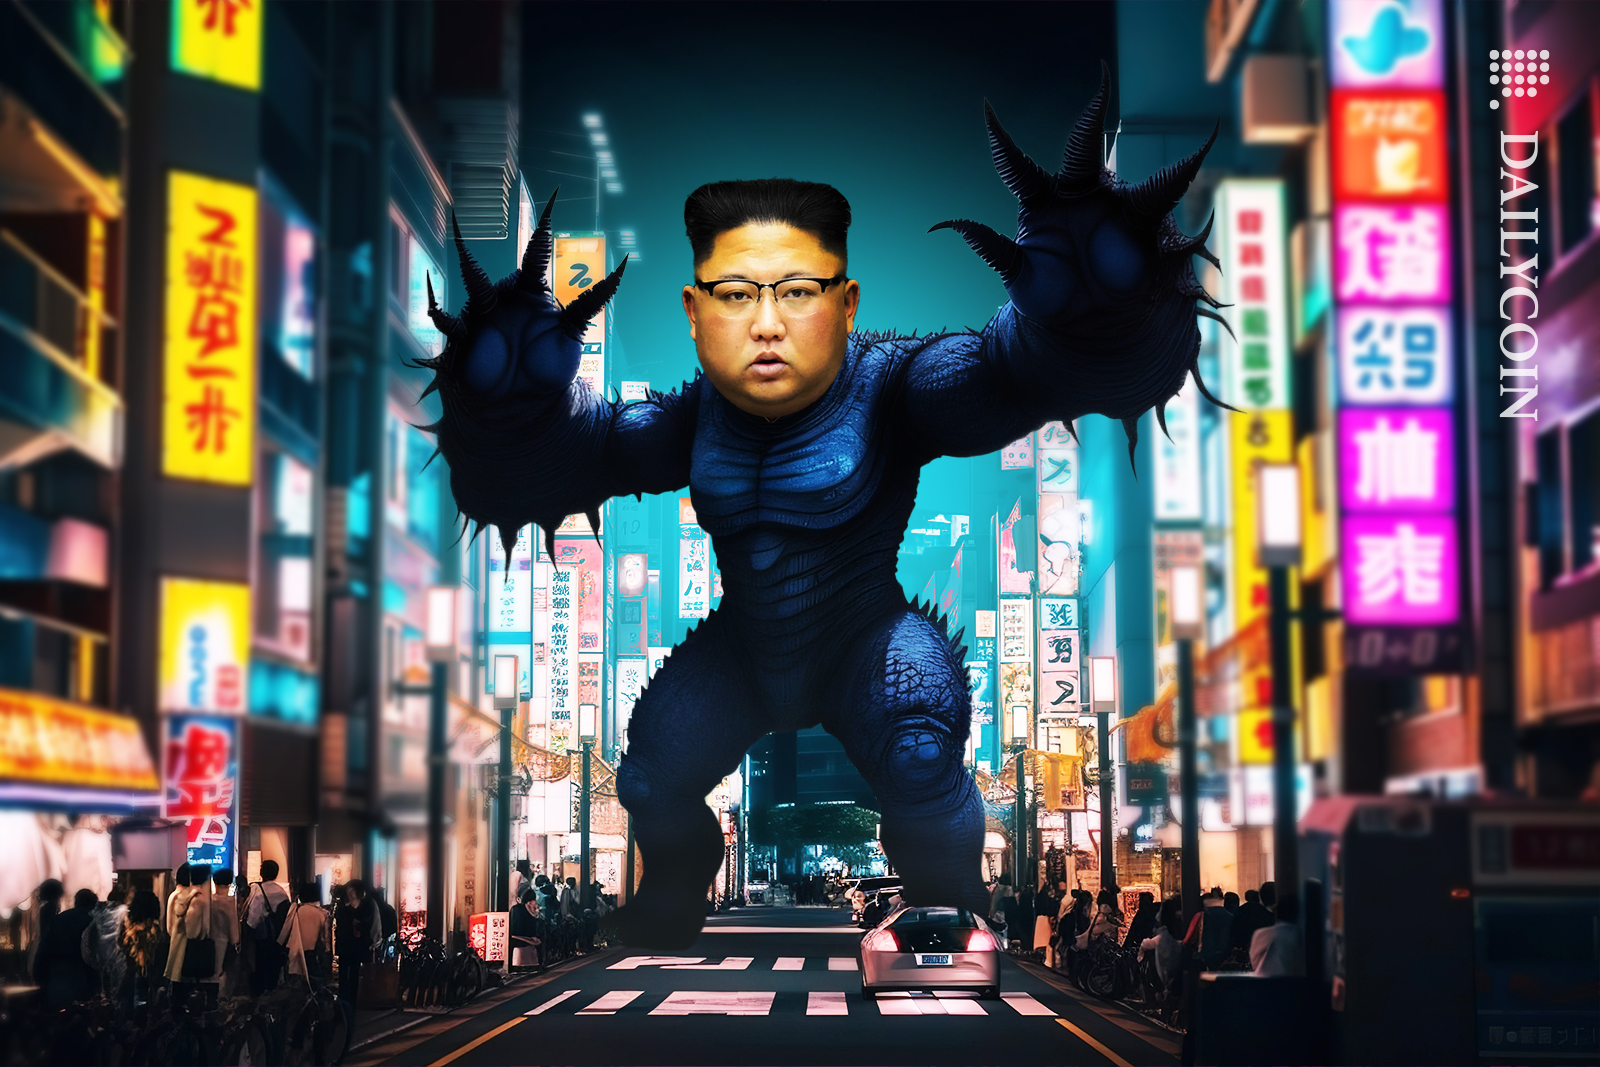 Kim Jong Un dressed as a monster in the middle of Tokyo.